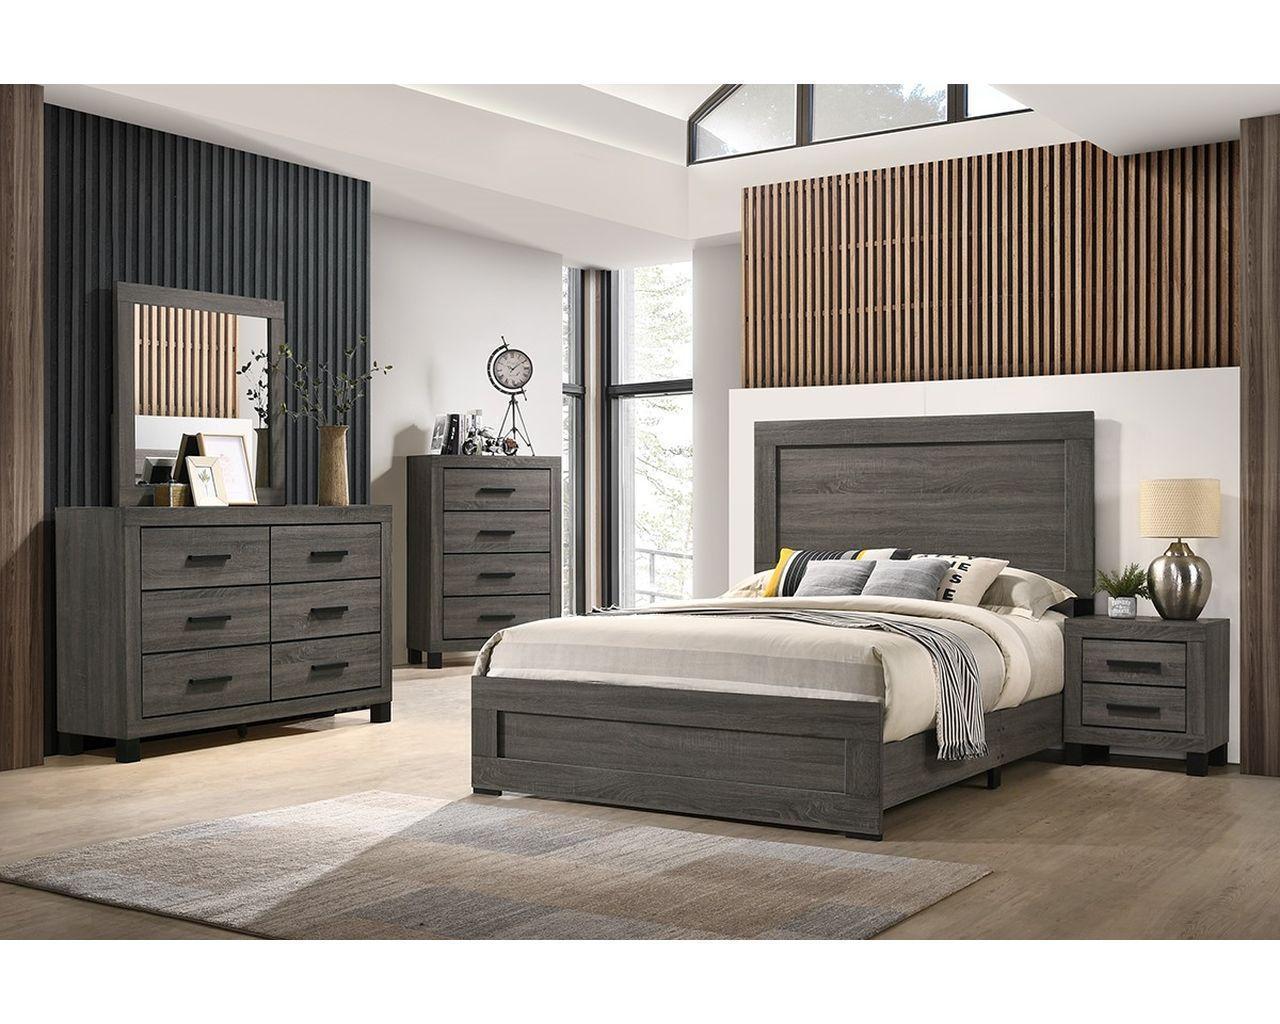 8321 Panel Bed,LifeStyle